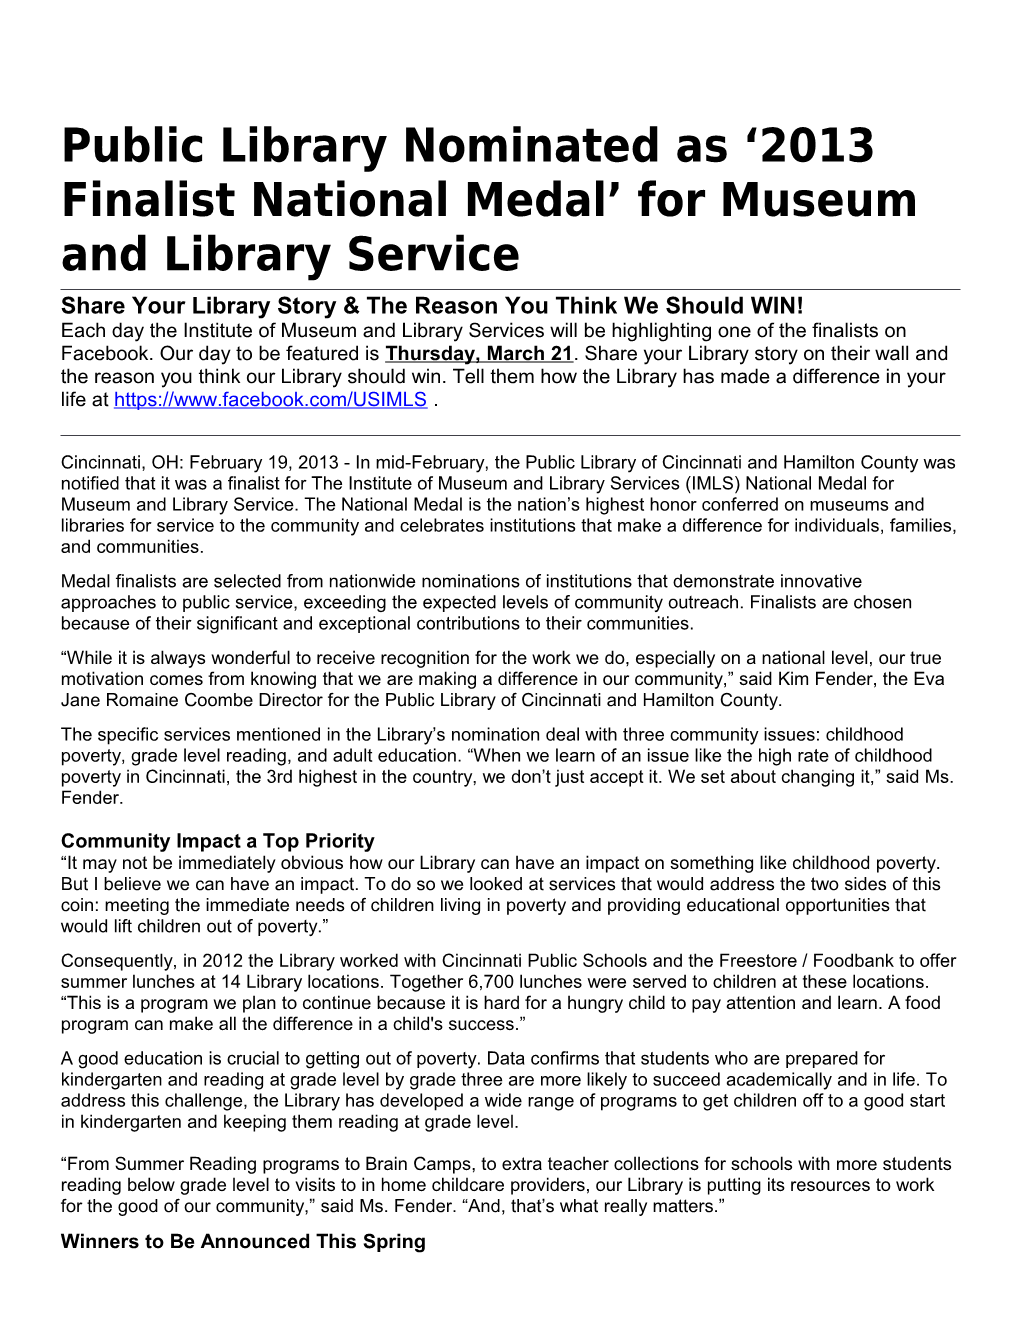 Public Library Nominated As 2013 Finalist National Medal for Museum and Library Service